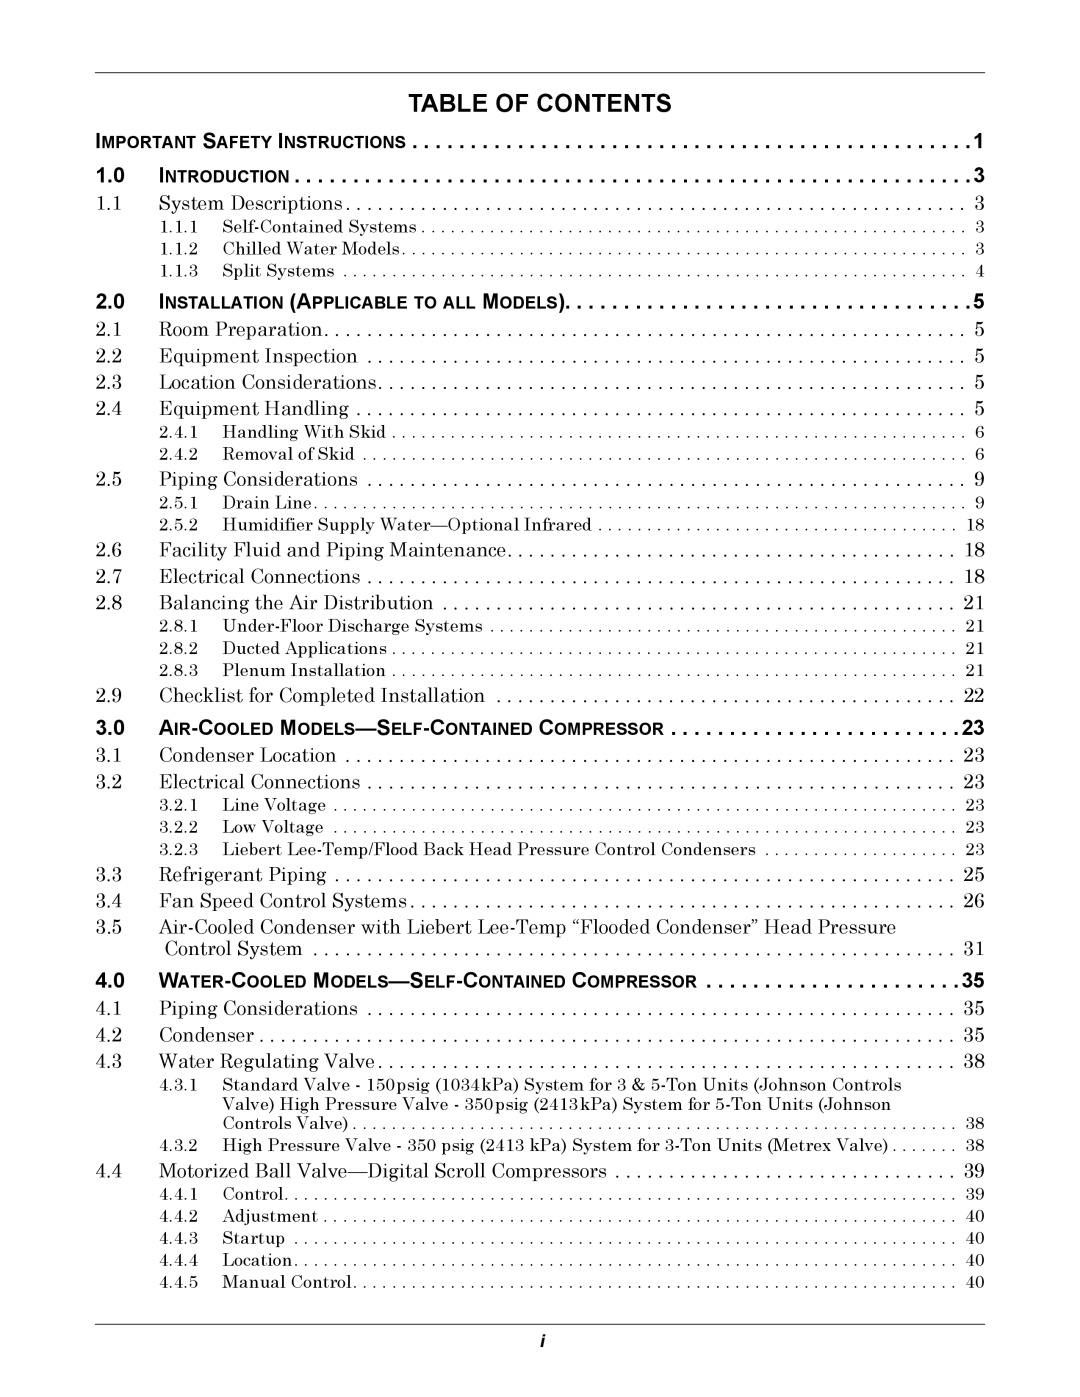 Emerson 3000 installation manual Table Of Contents 